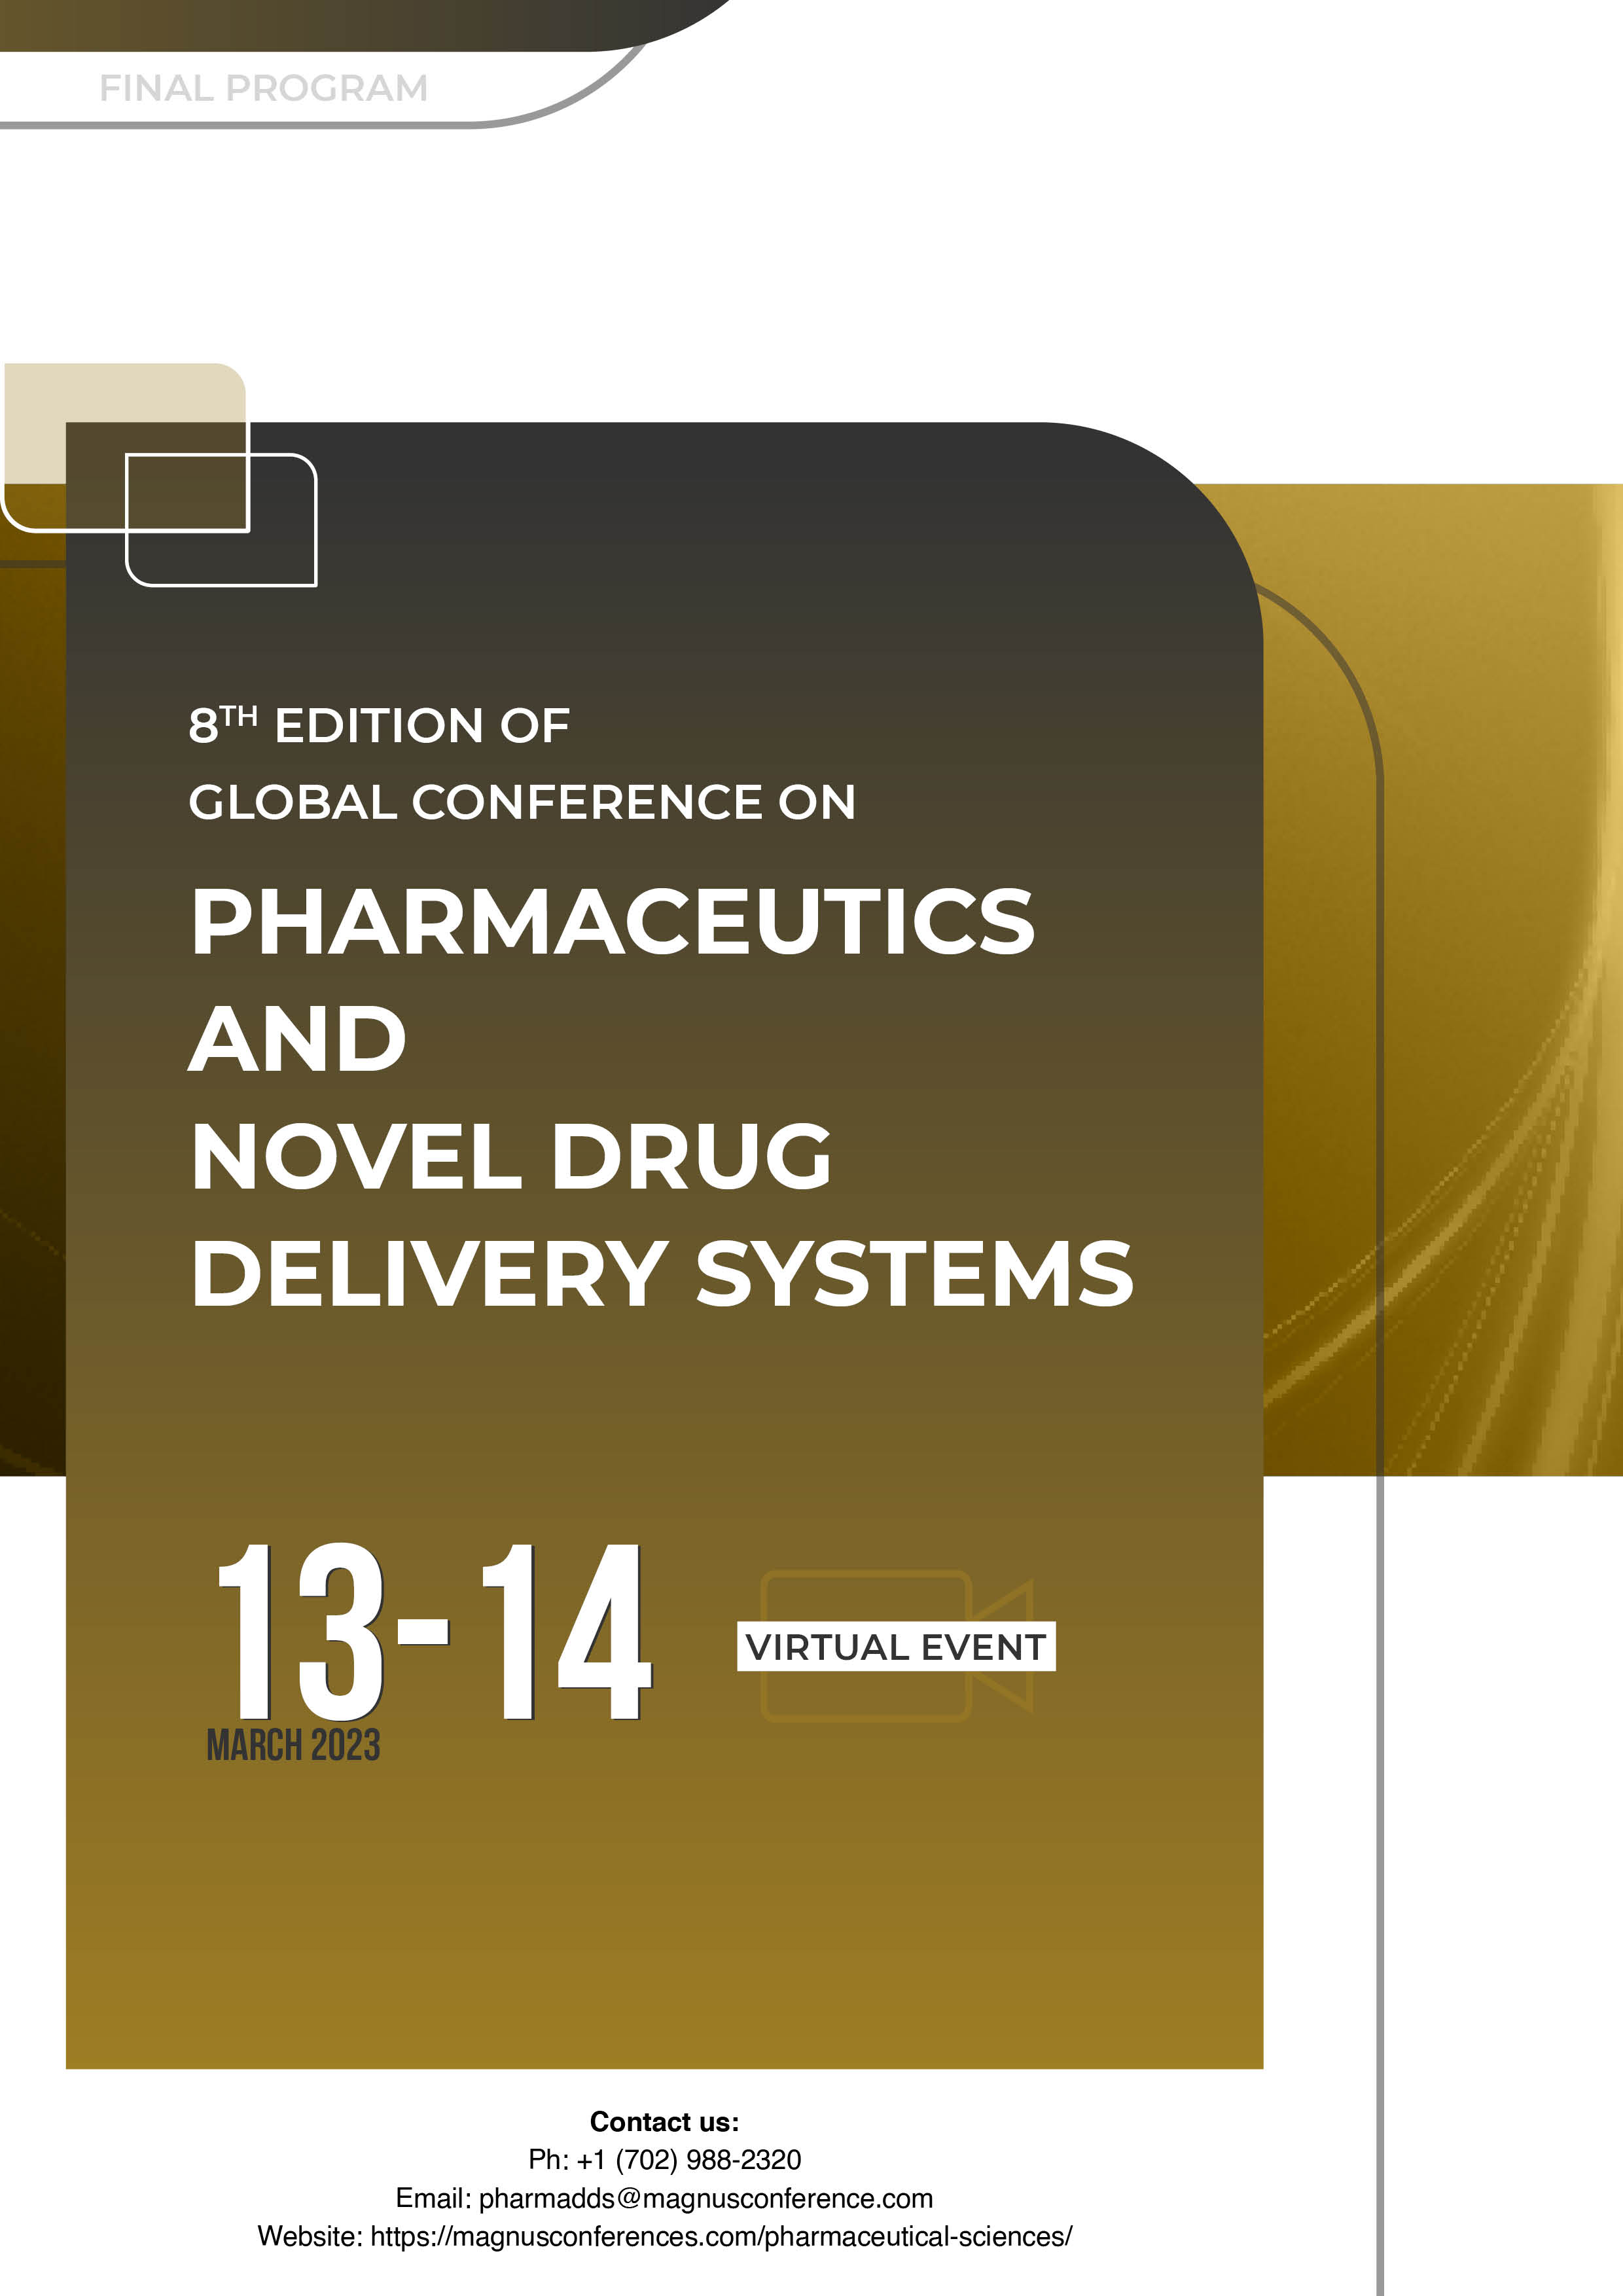 8th Edition of Global Conference on Pharmaceutics and Novel Drug Delivery Systems | Online Event Program